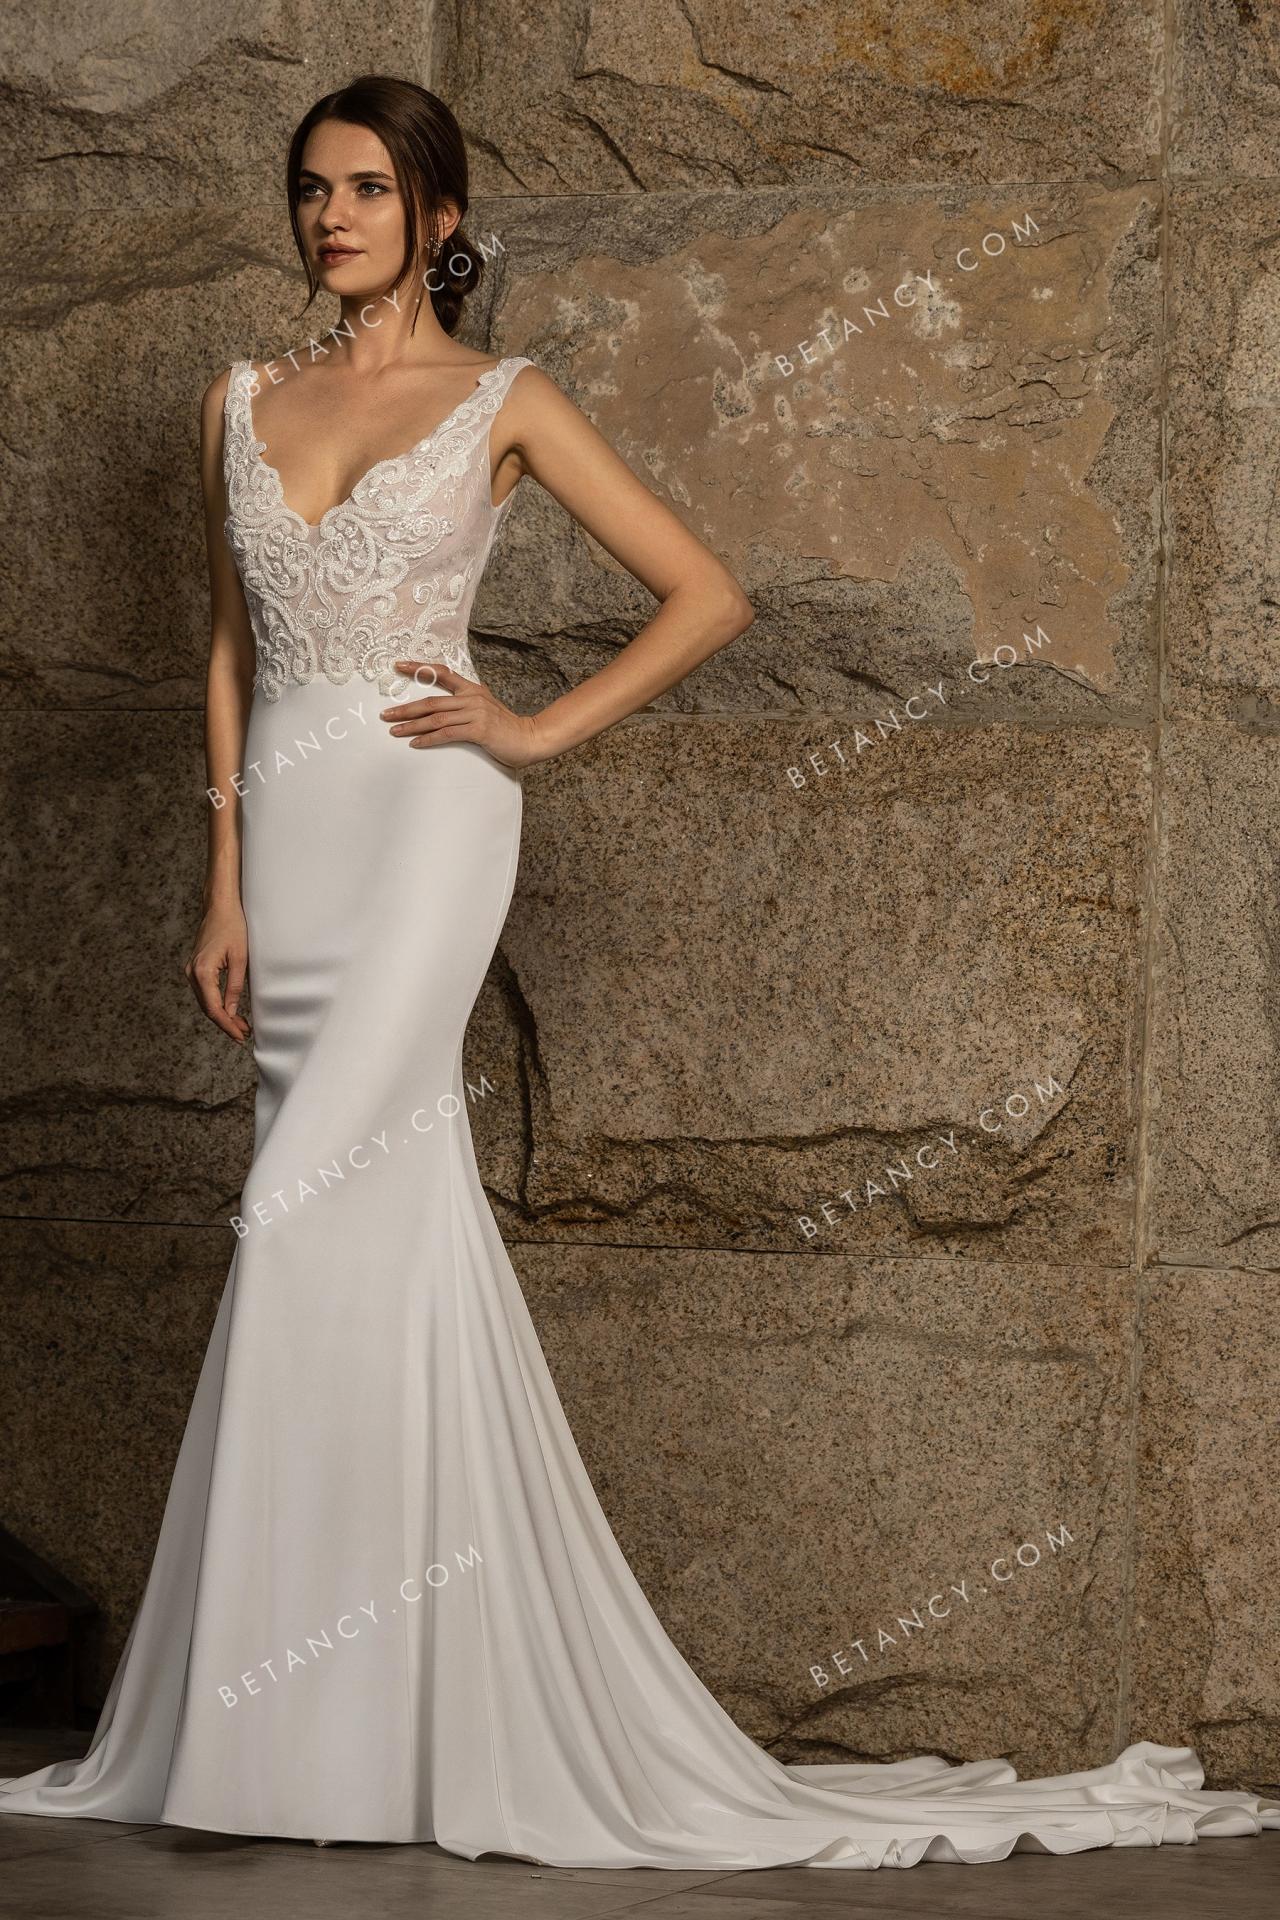 One of a kind wedding dress to flaunt your best bridal look 2